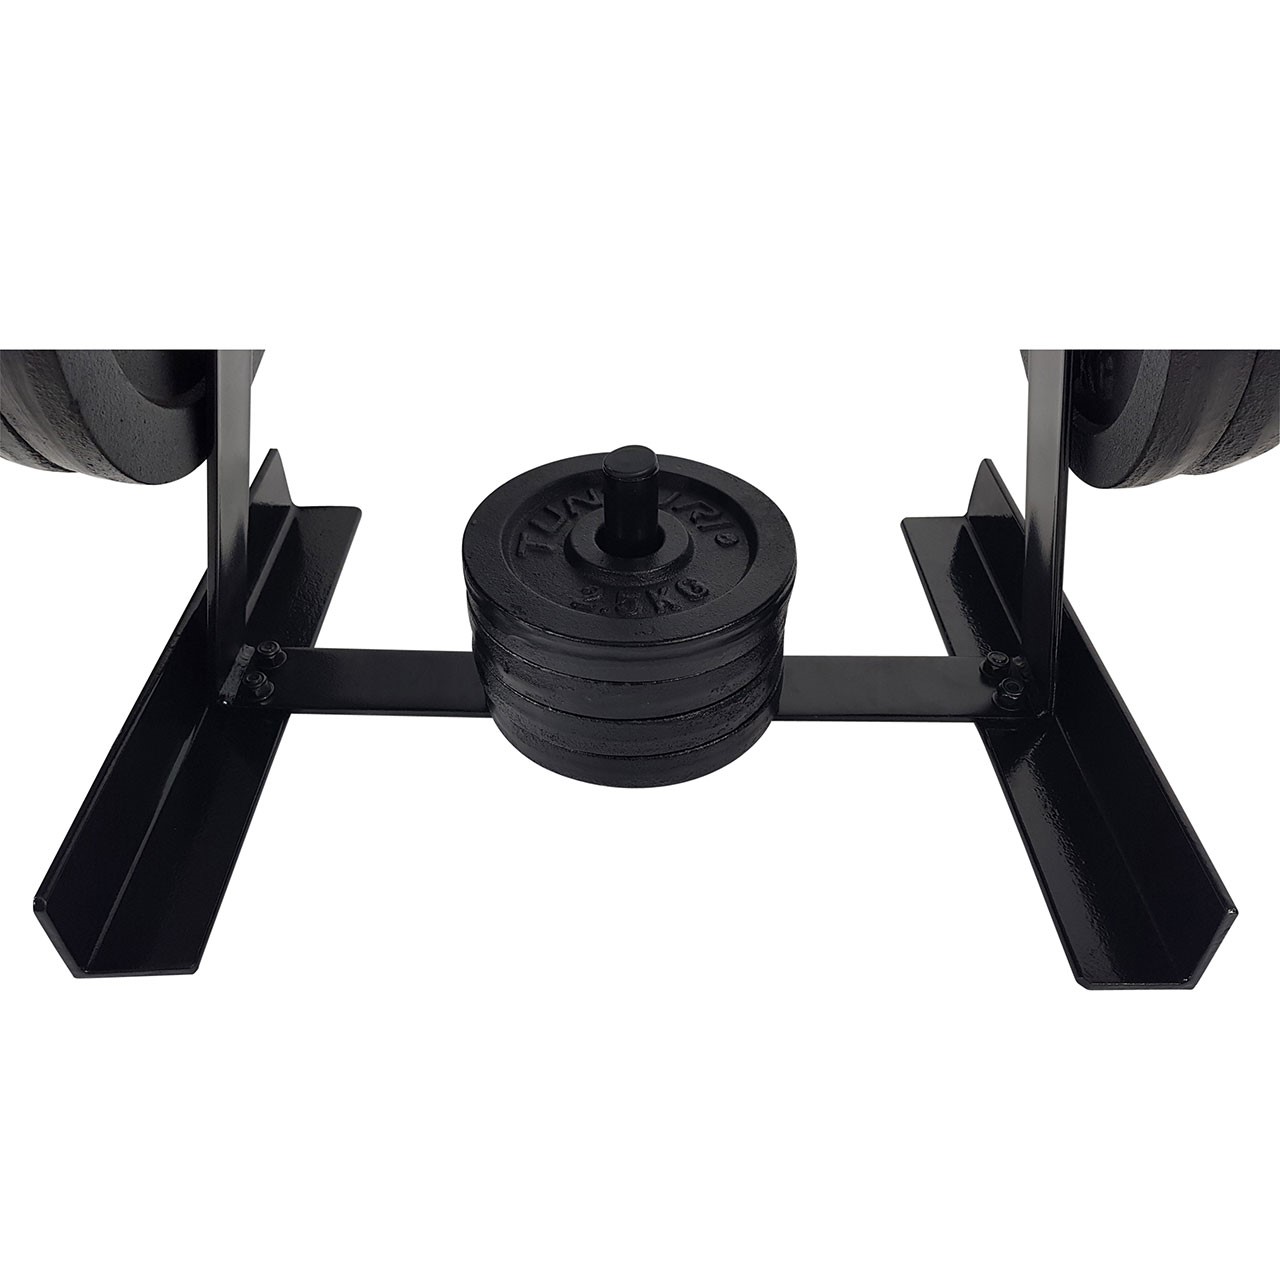 Tunturi Rack for 30 mm and 50 mm Discs